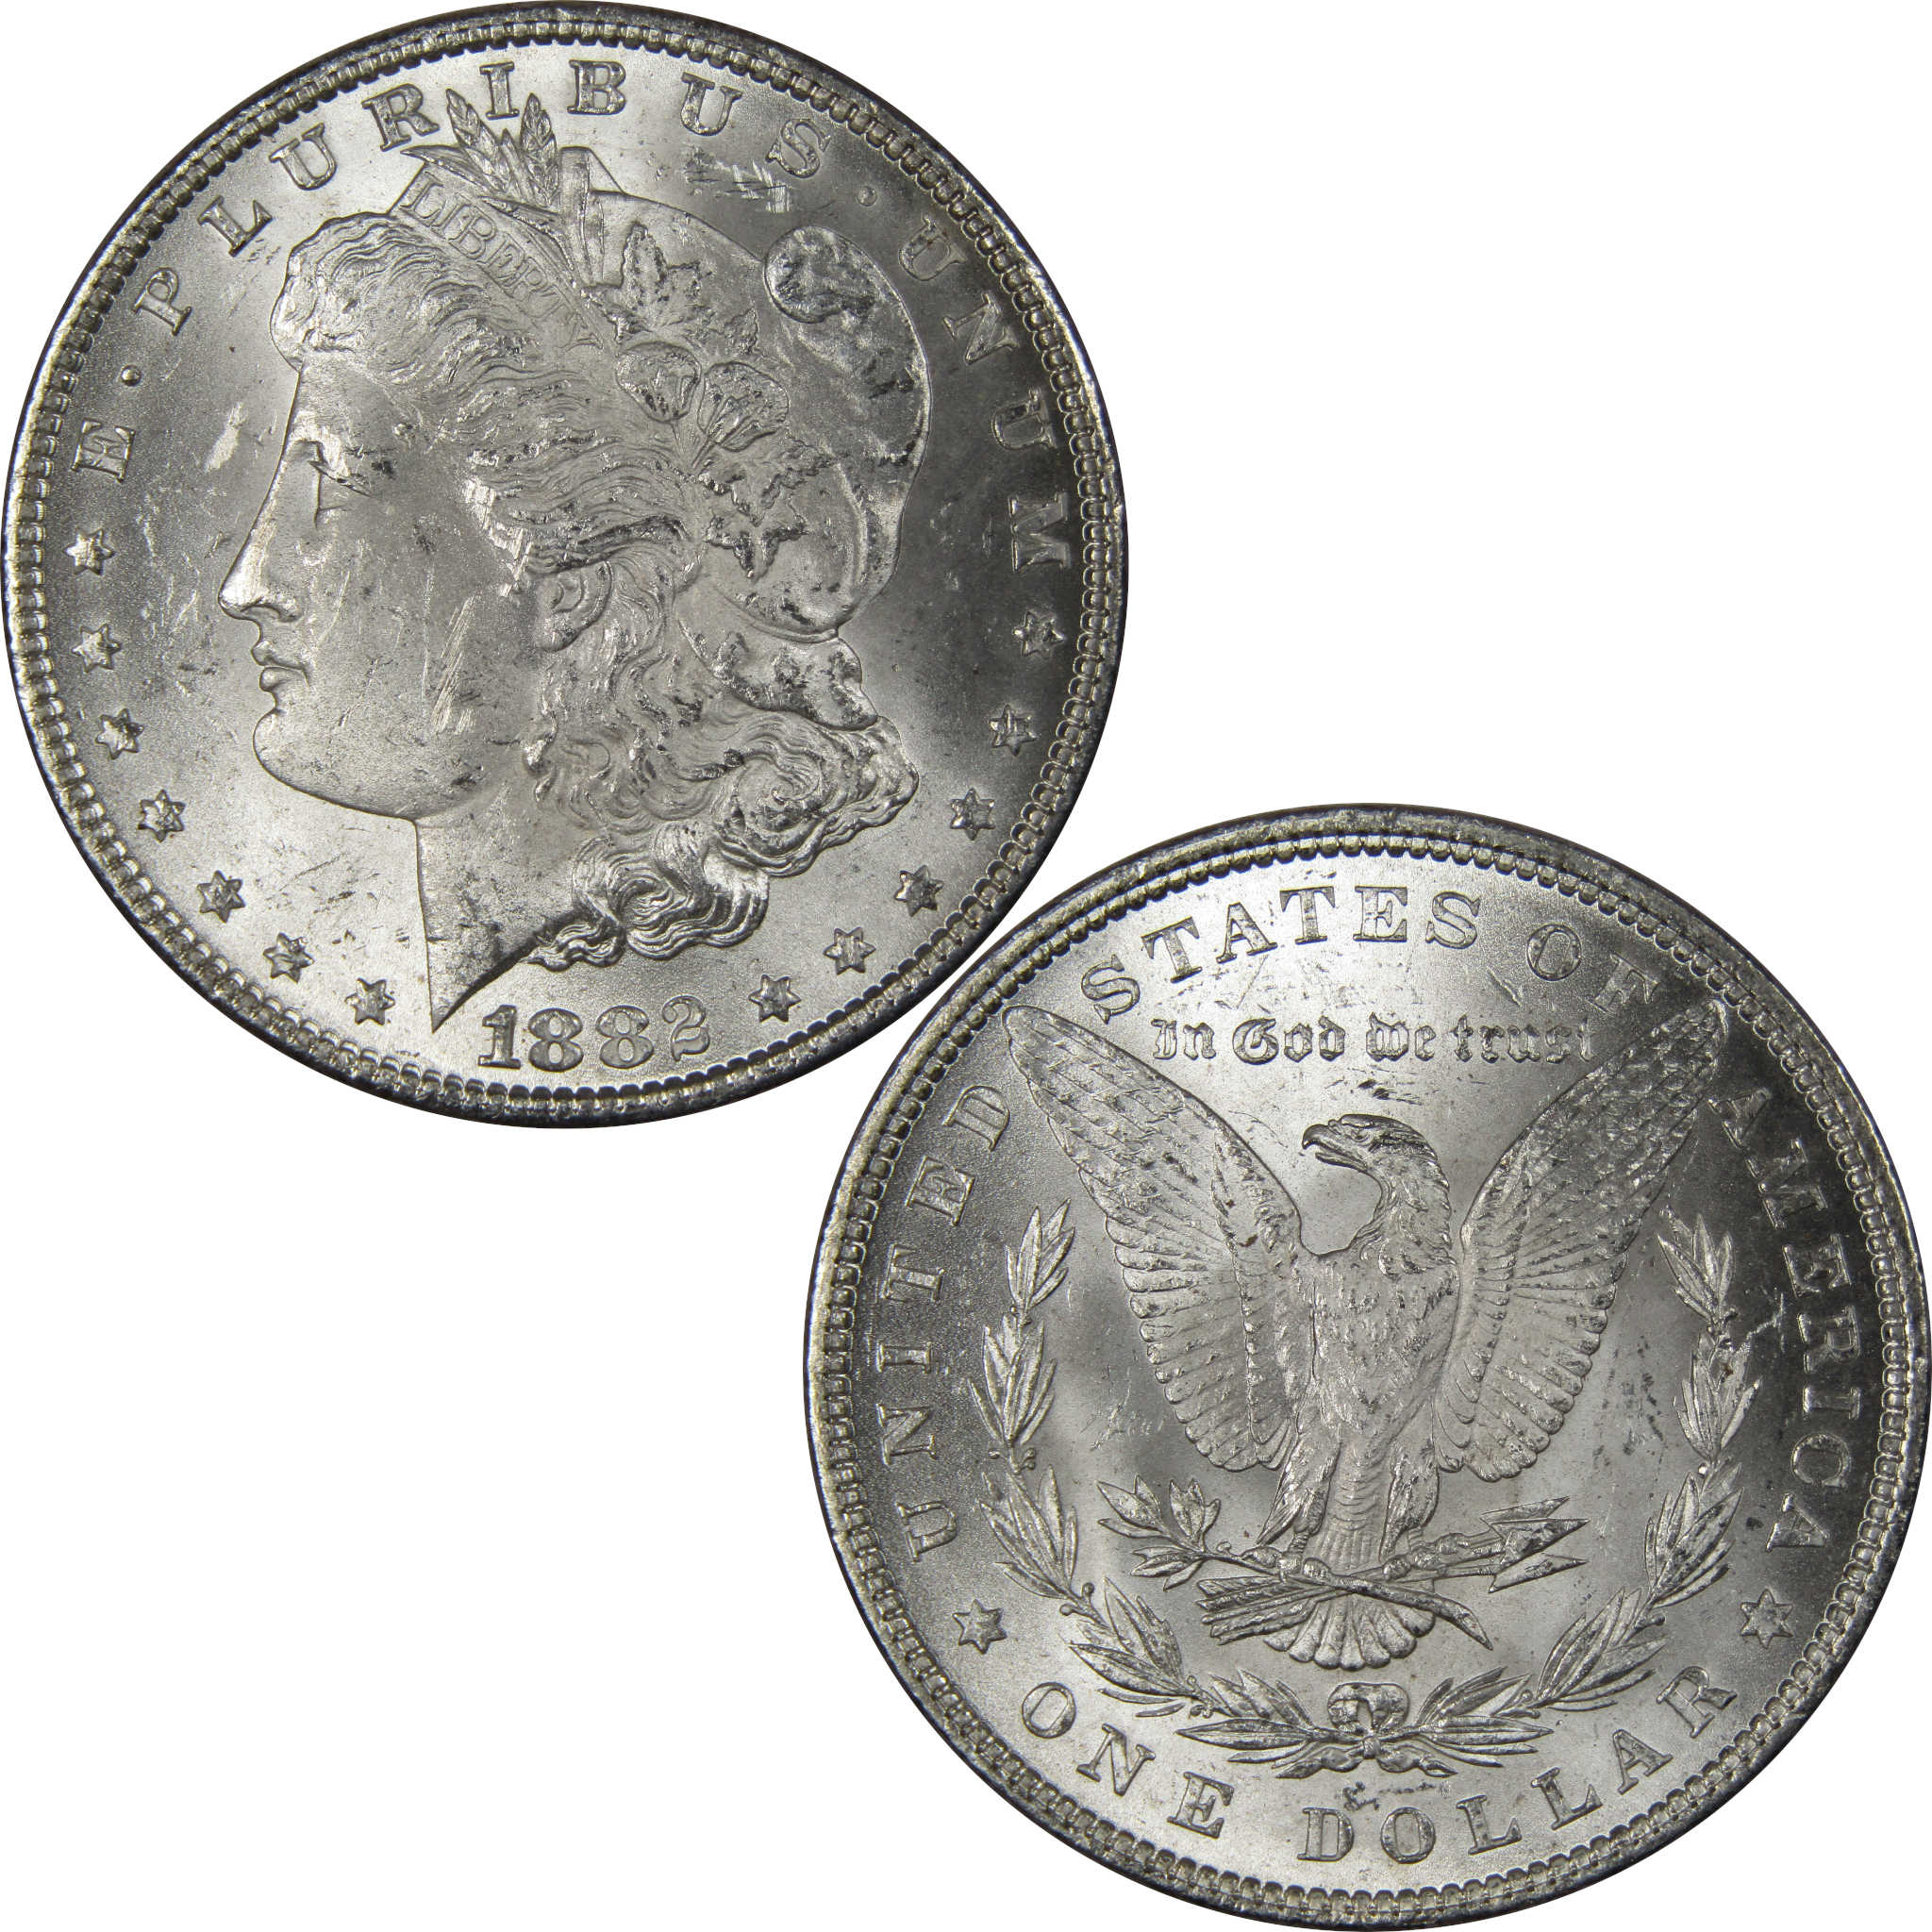 1882 Morgan Dollar BU Uncirculated Mint State 90% Silver SKU:IPC9720 - Morgan coin - Morgan silver dollar - Morgan silver dollar for sale - Profile Coins &amp; Collectibles